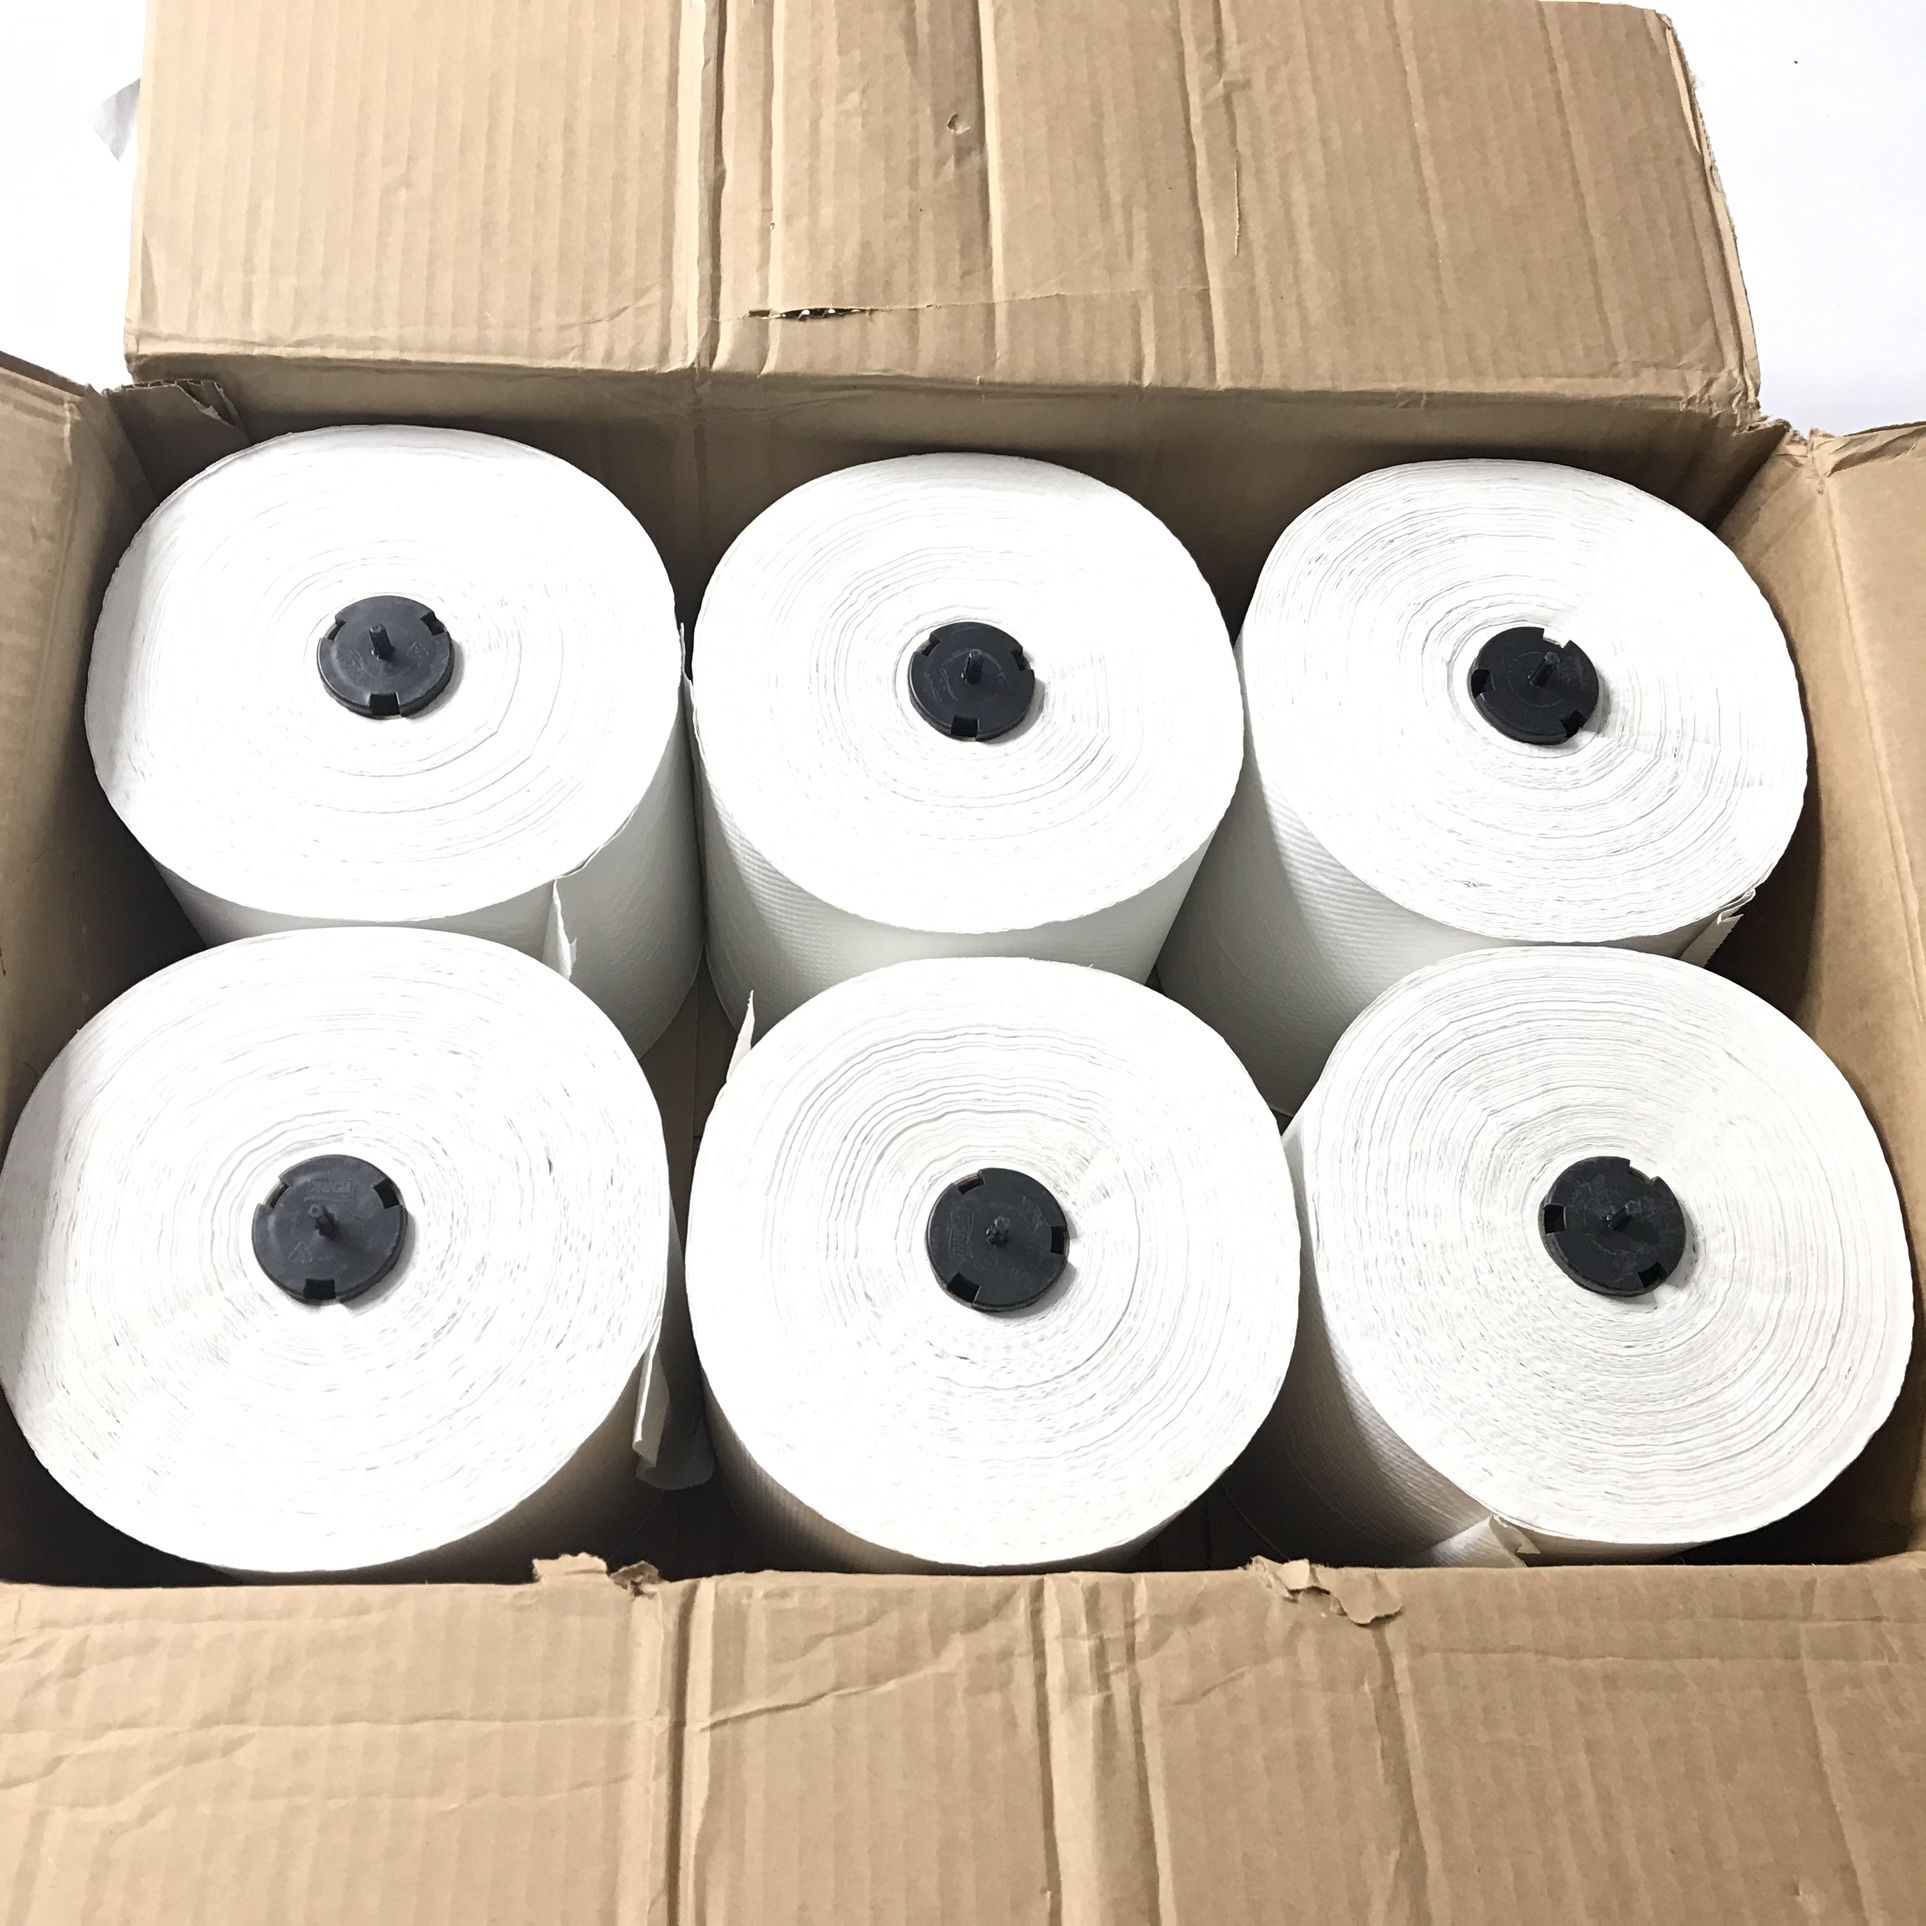 Case of 6 Tork Matic Advanced Paper Towel Roll H1 Hand Towel 290089 White 